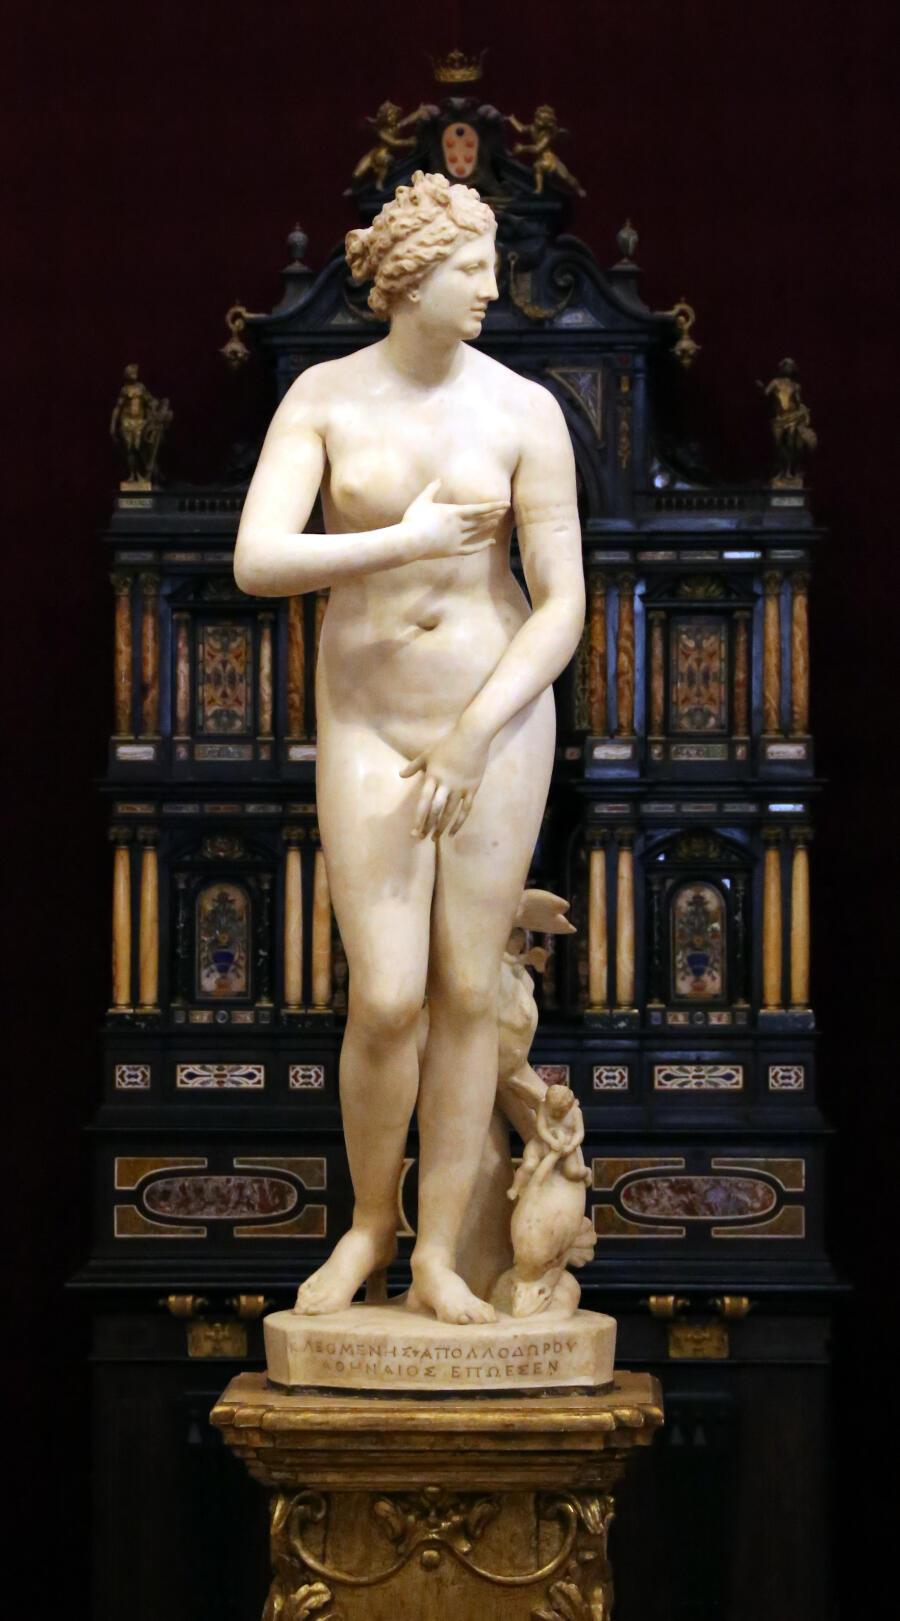 Medici Venus, Galerie des Offices Florence, Sailko / Wikimedia Commons CC BY